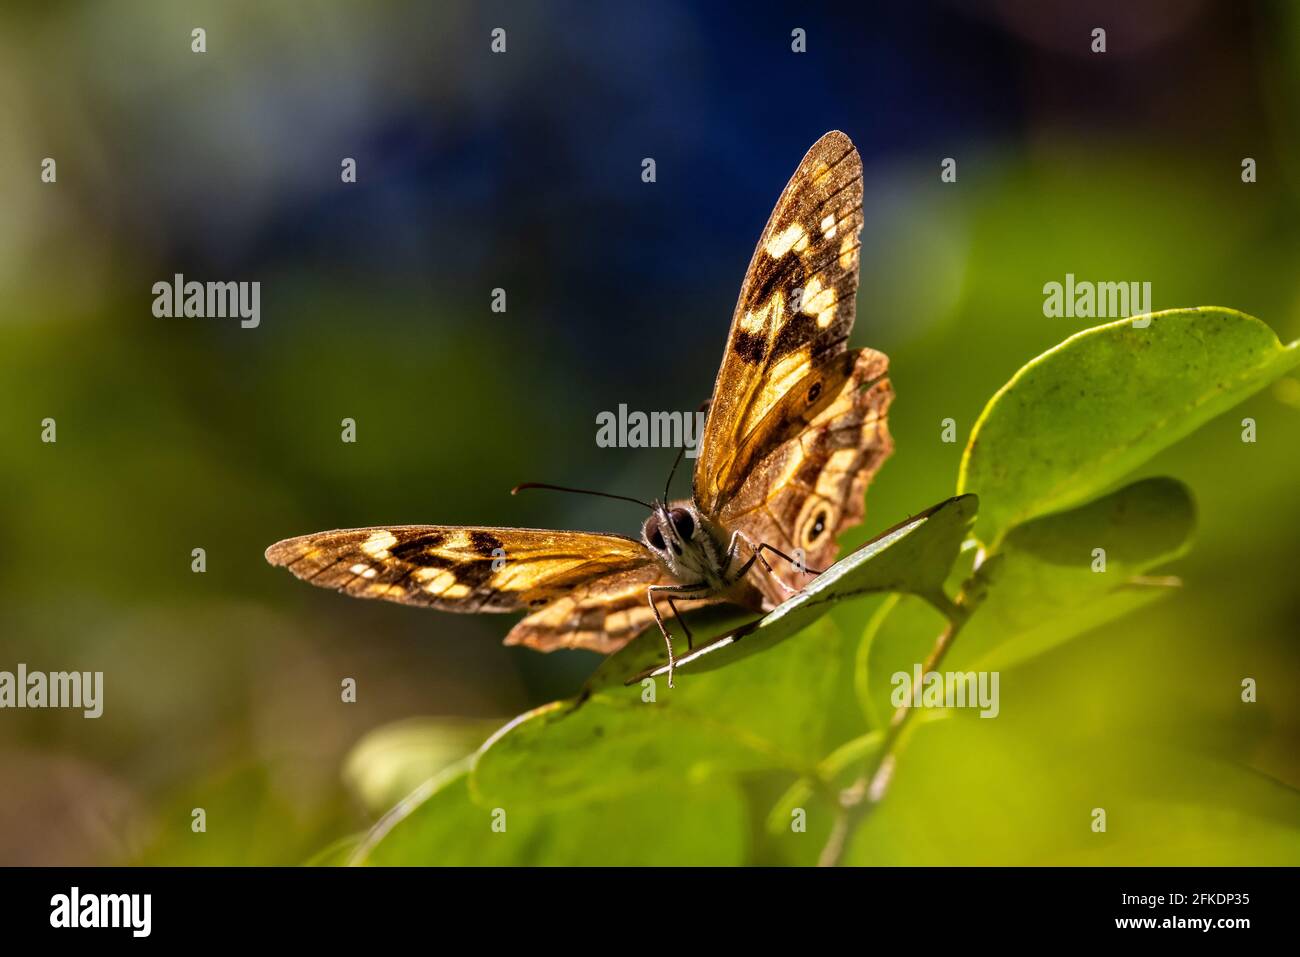 Small brown butterfly resting on green leaf Stock Photo